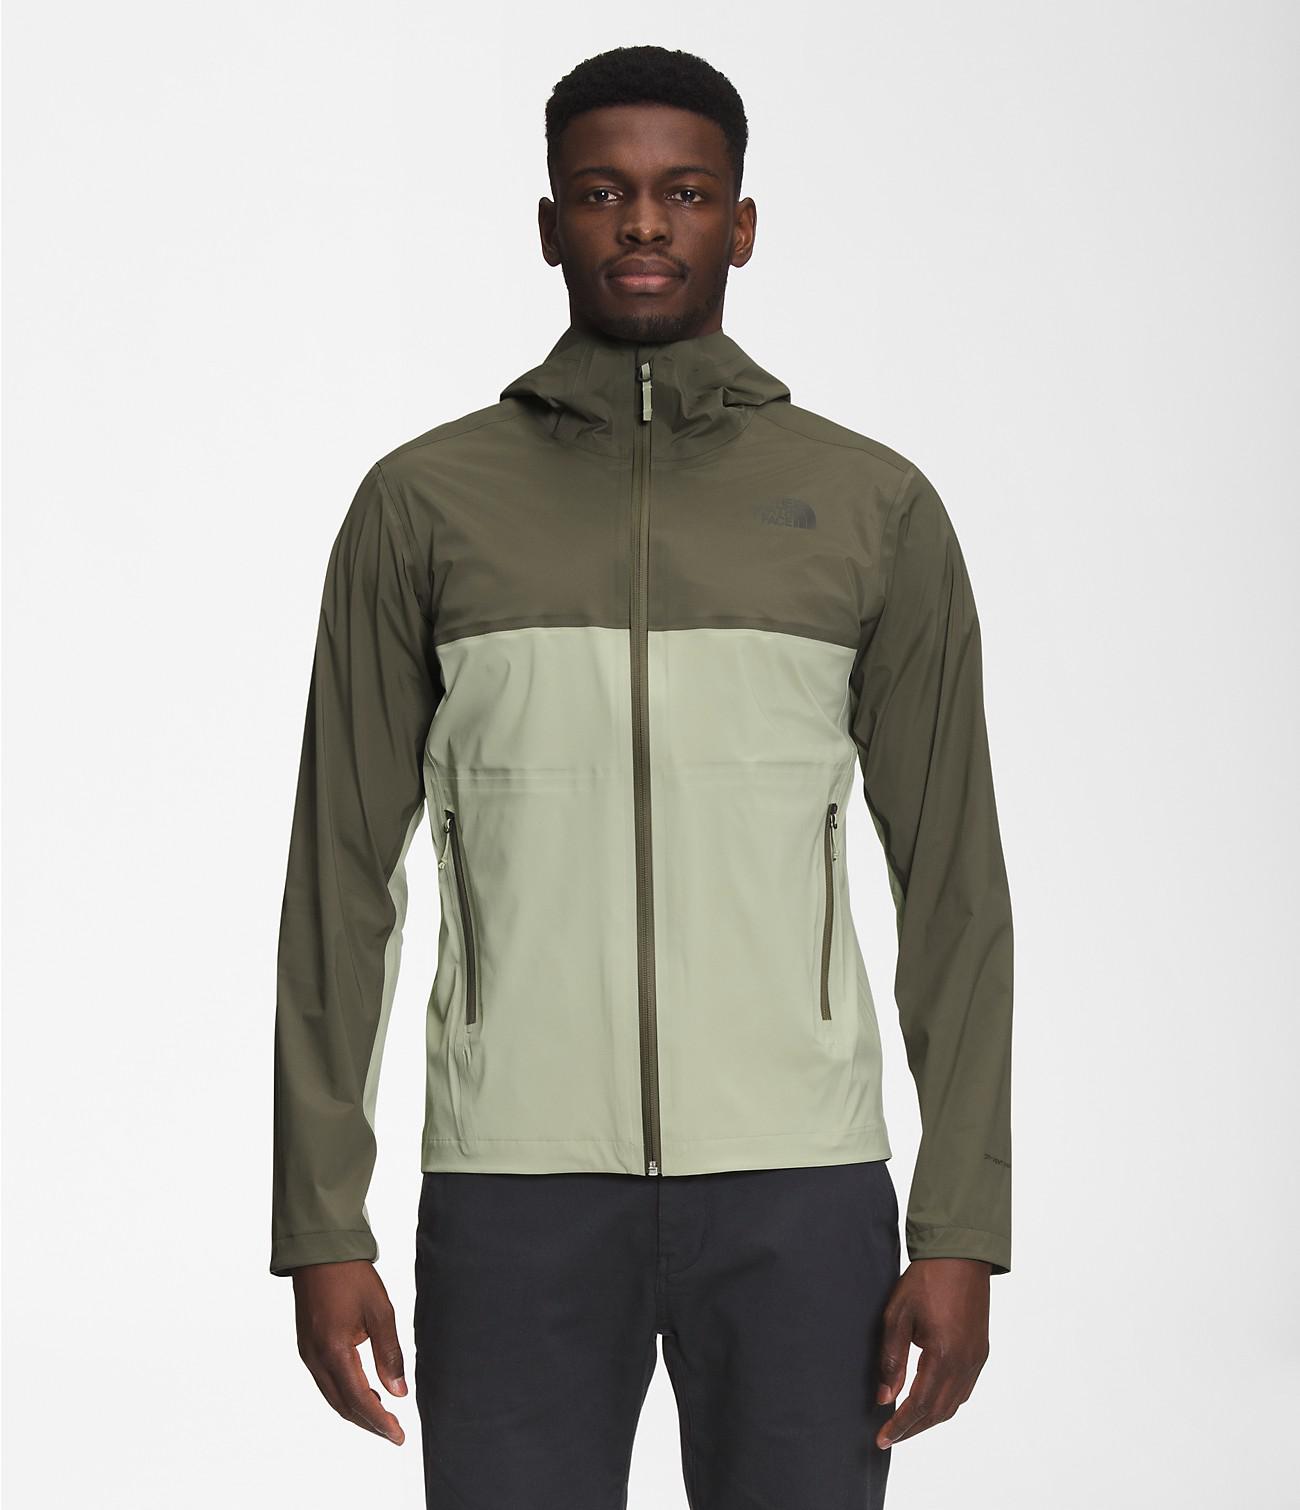 Men’s West Basin DryVent™ Jacket by THE NORTH FACE